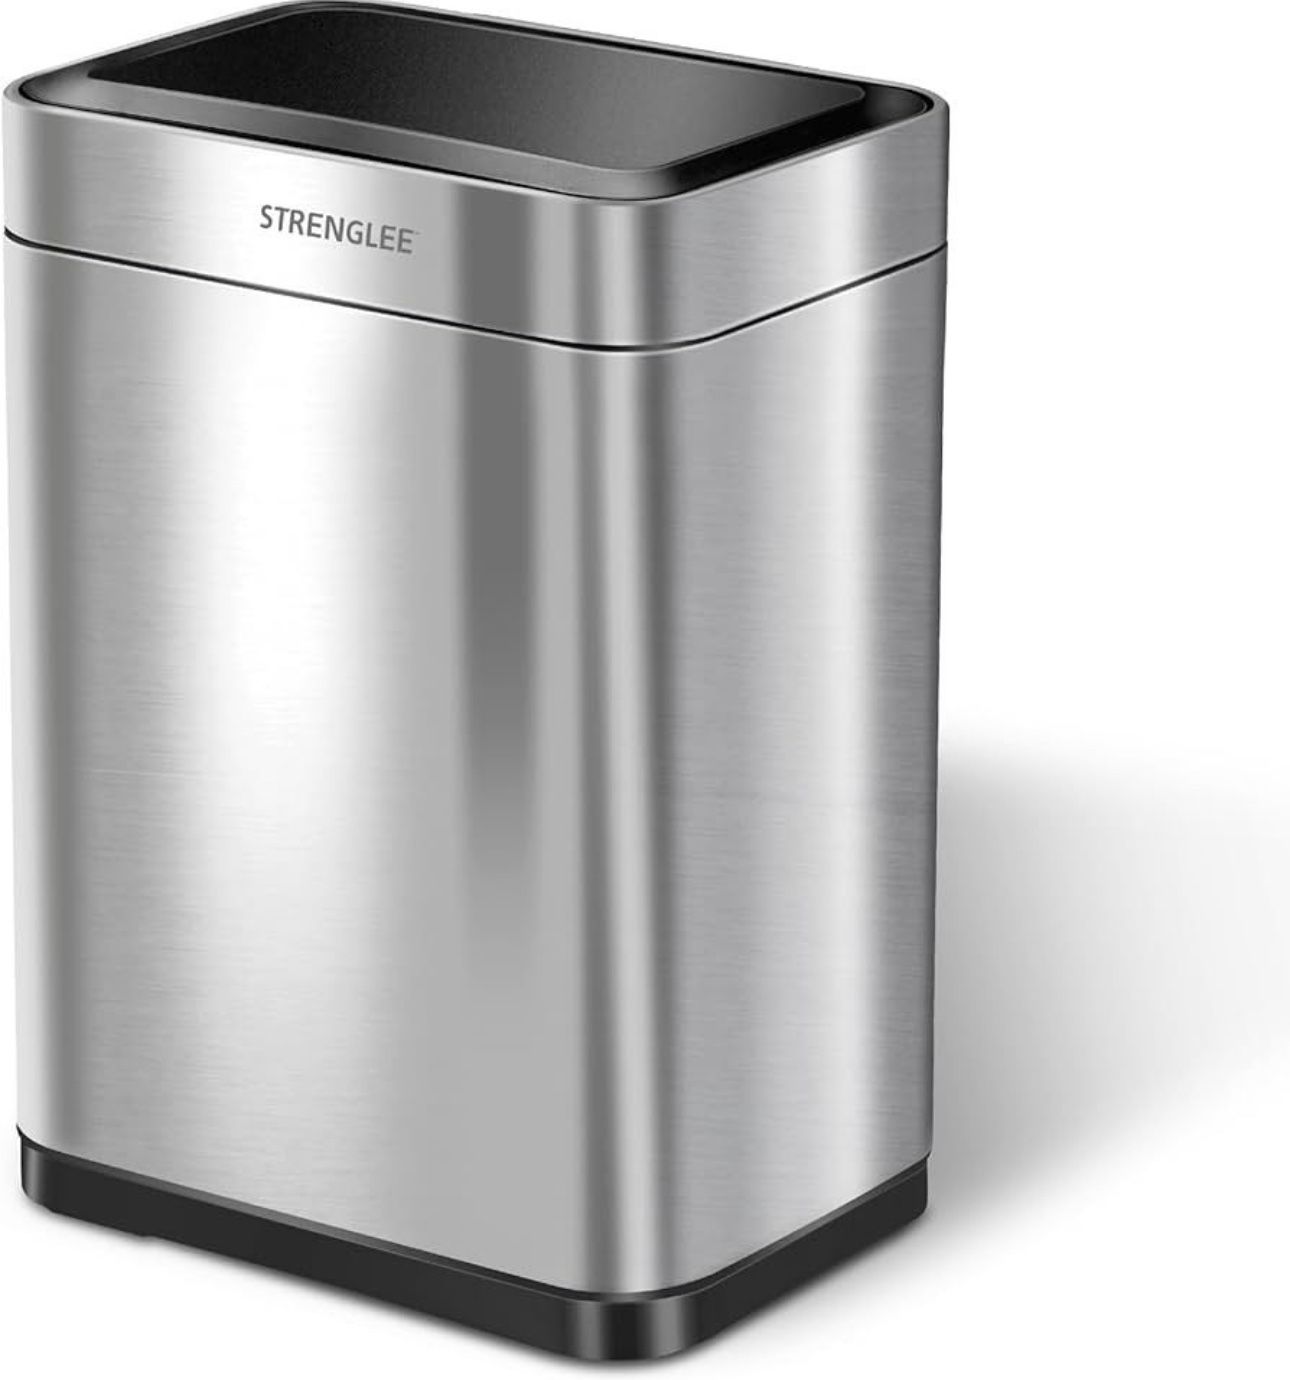 STRENGLEE 16 Gallon Stainless Steel Trash Can Kitchen Large with Lid Vibration Automatic Sensor Large Kitchen Garbage Can Touchless Automatic Trash Ca